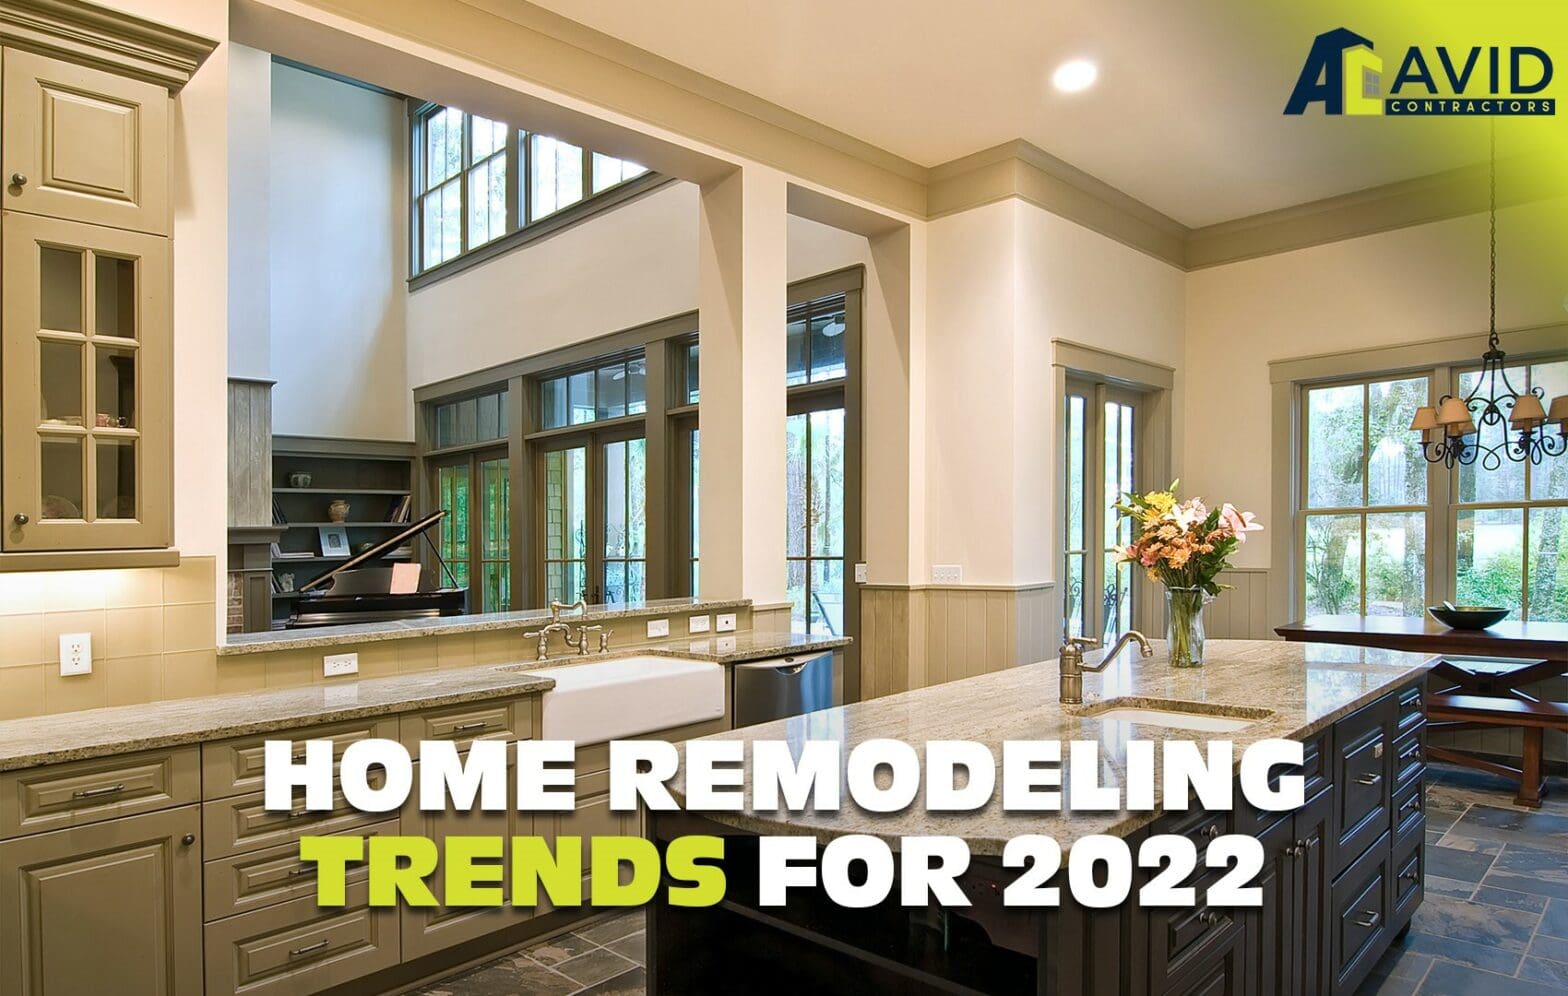 Home Remodeling Trends for 2022